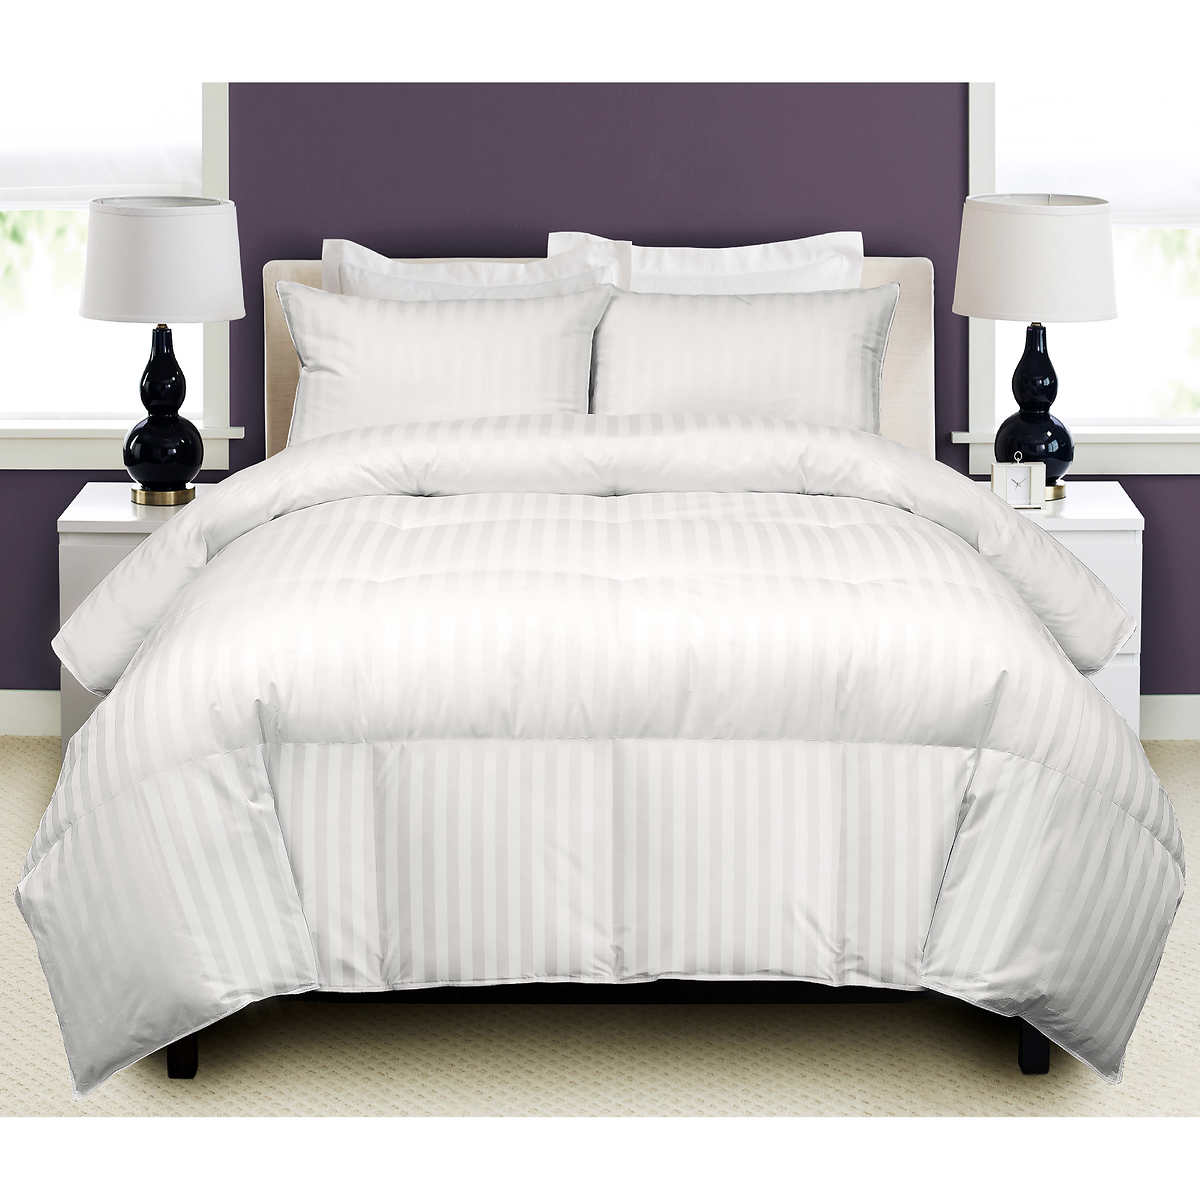 Hotel Grand White Goose Down Comforter, Feather Proof Duvet Cover